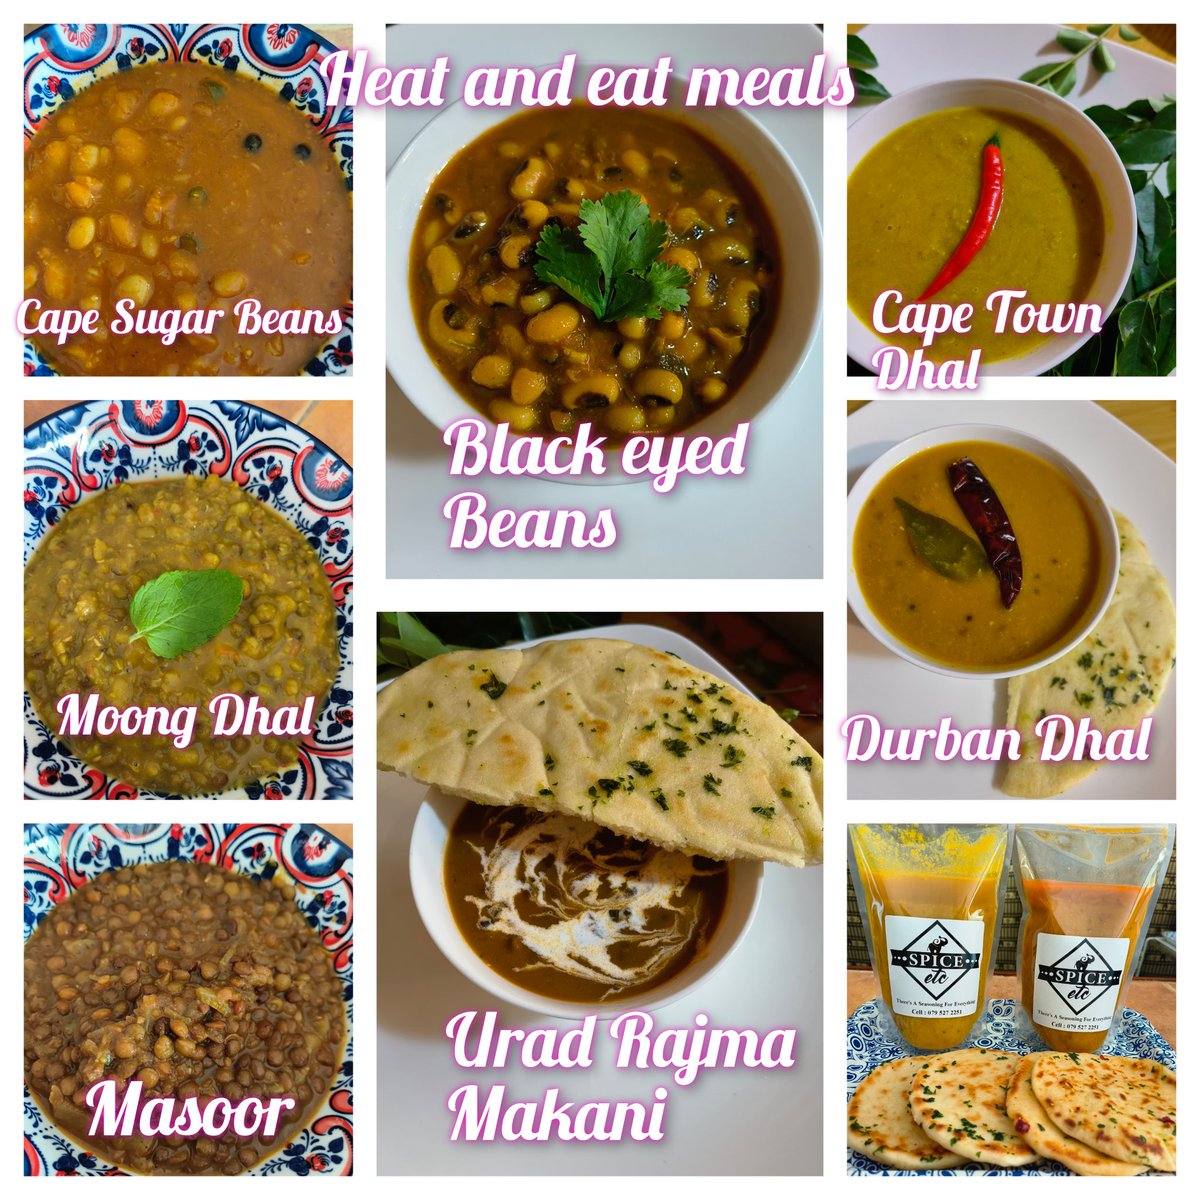 Cape Town Dhal R65 Durban Dhal R65 Masoor R65 Black eye Beans R80 Moong Dhal R80 Cape Sugar Beans R85 Urad Rajma Makani R85 Served with 4 flat bread for this month only, available from Simonstown and Rondebosch East Watsapp Mishkaah on 0795272251